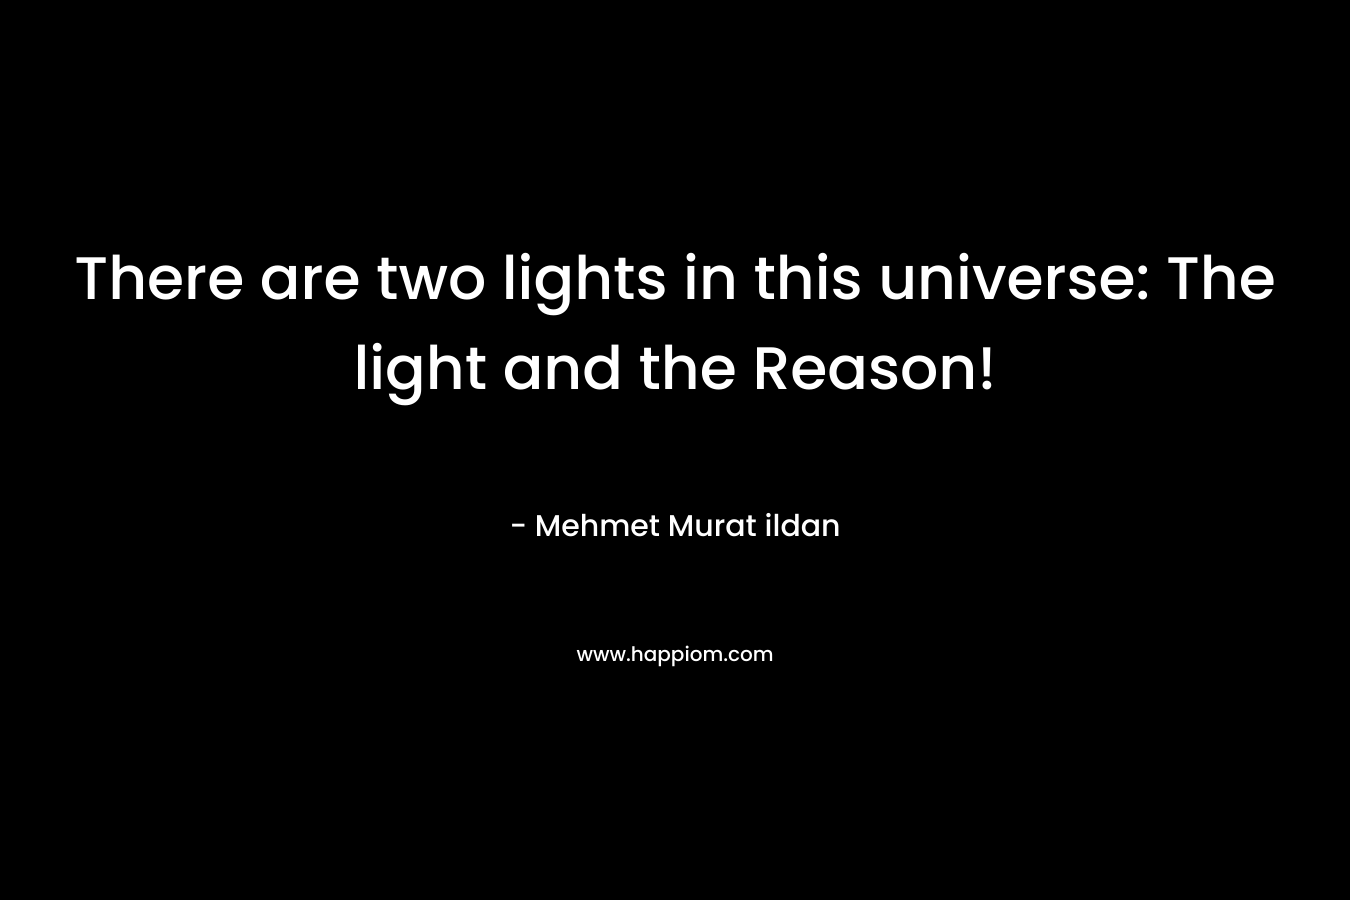 There are two lights in this universe: The light and the Reason!